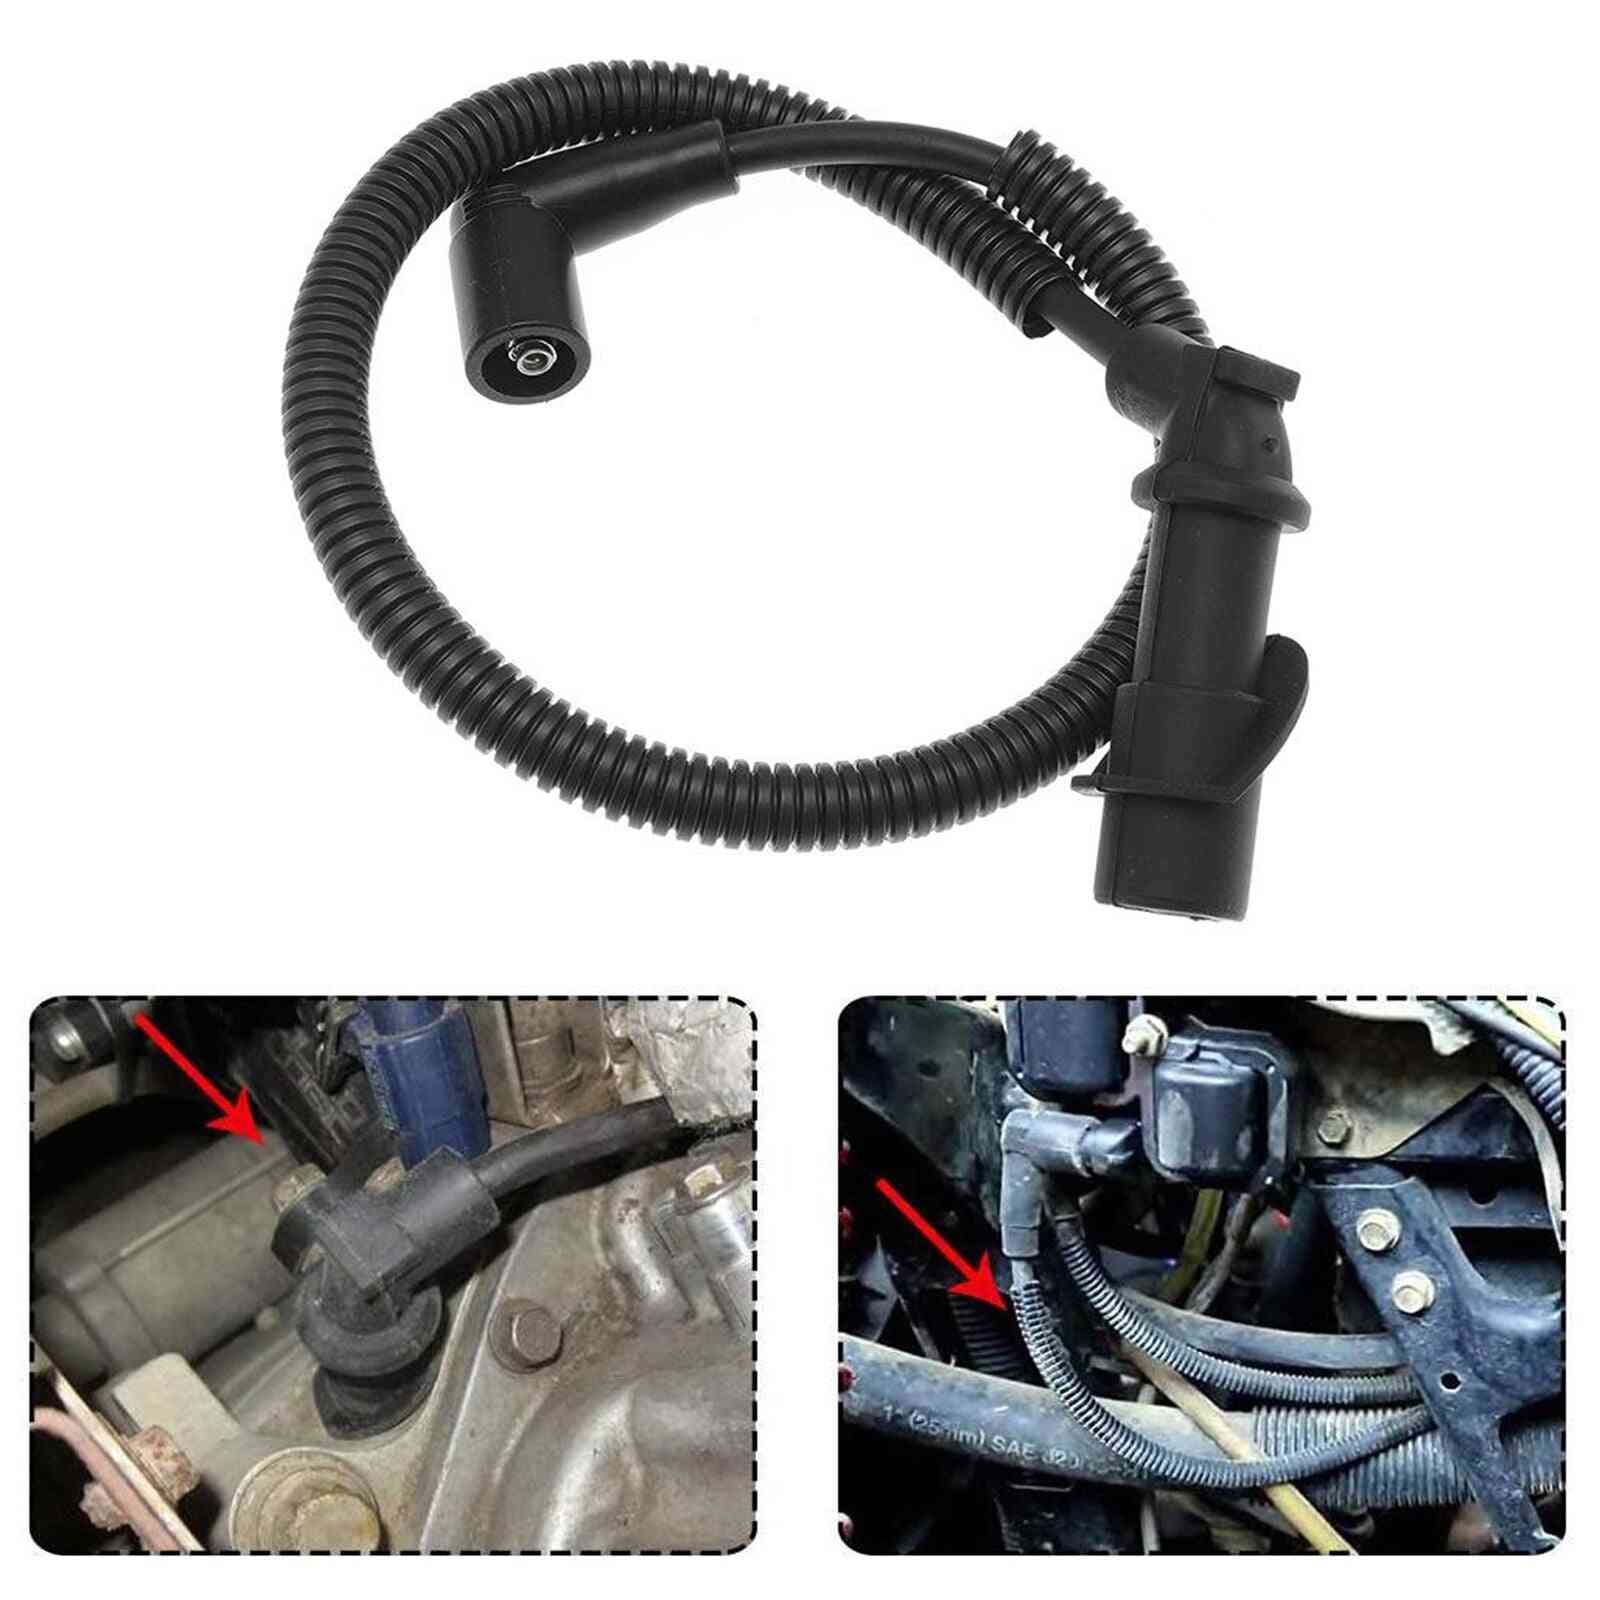 Spark Plug Ignition Coil Wires For Polaris Rzr